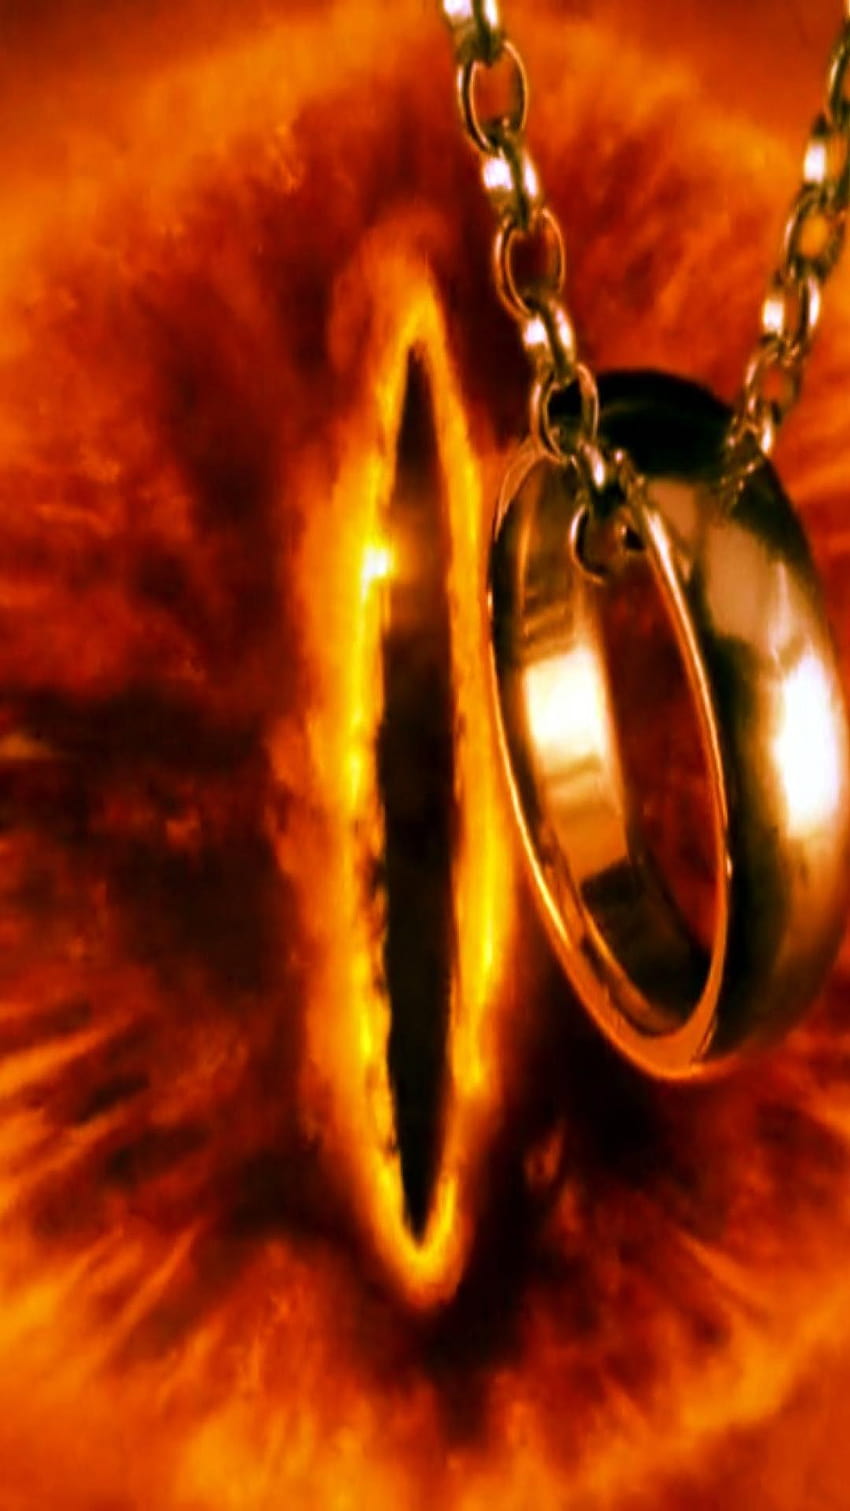 Best 5 Sauron on Hip, the lord of the rings mobile HD phone wallpaper